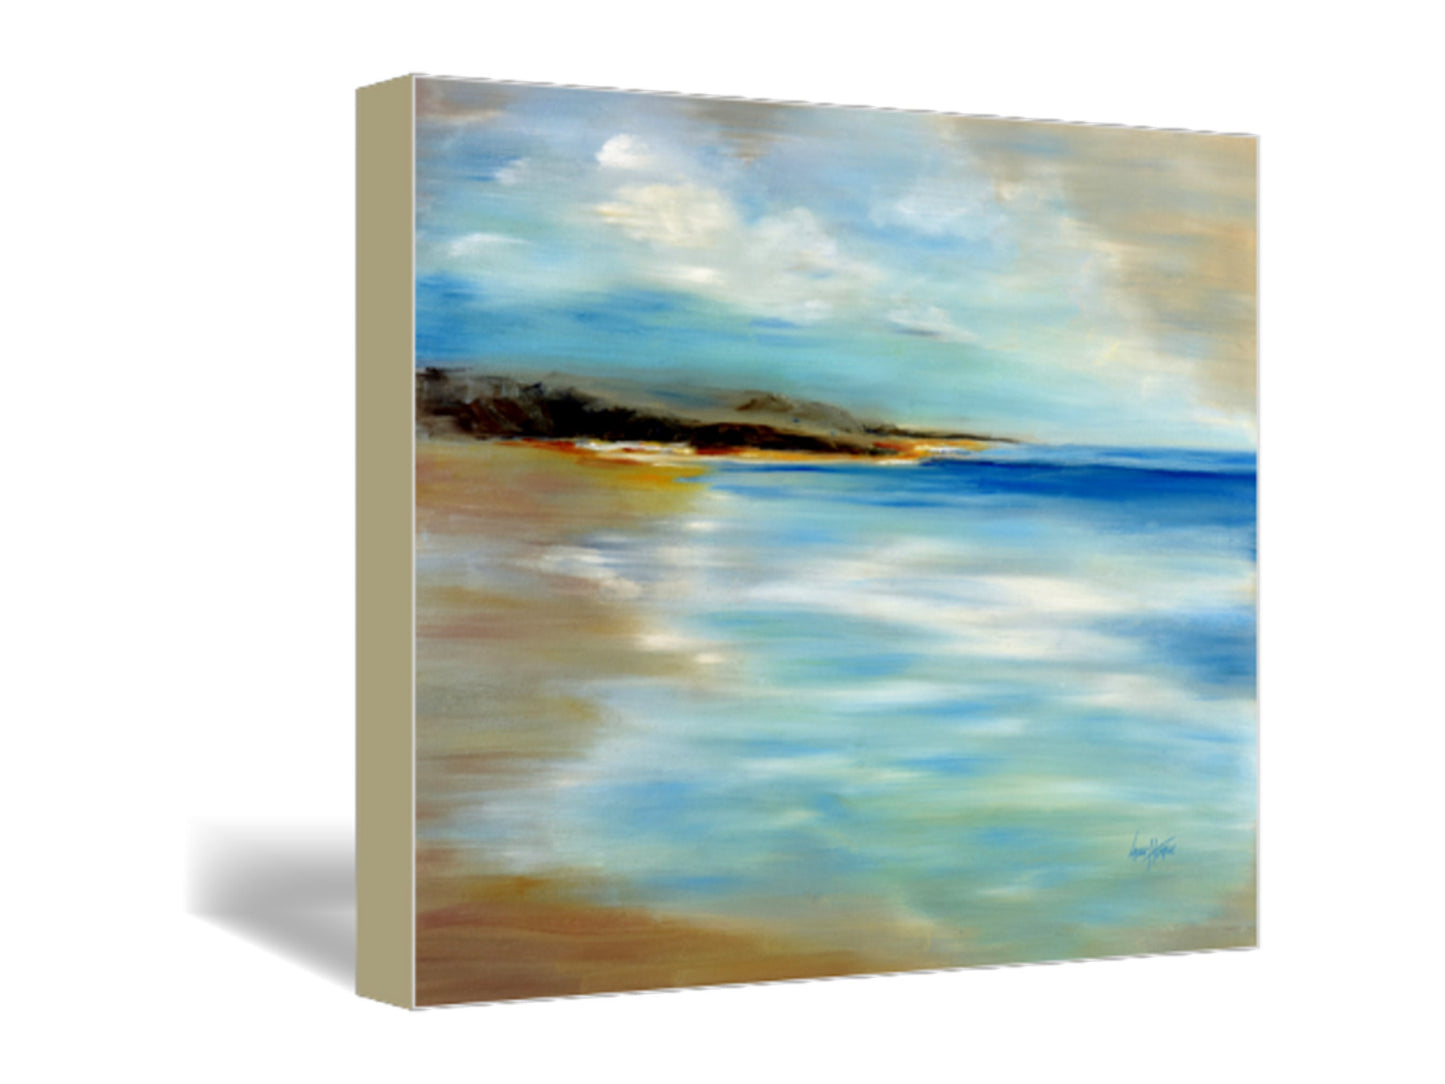 Impressionist Painting, Coastal Decor, Canvas print, Oversized Wall Art, Above Bed Decor, Oil Painting